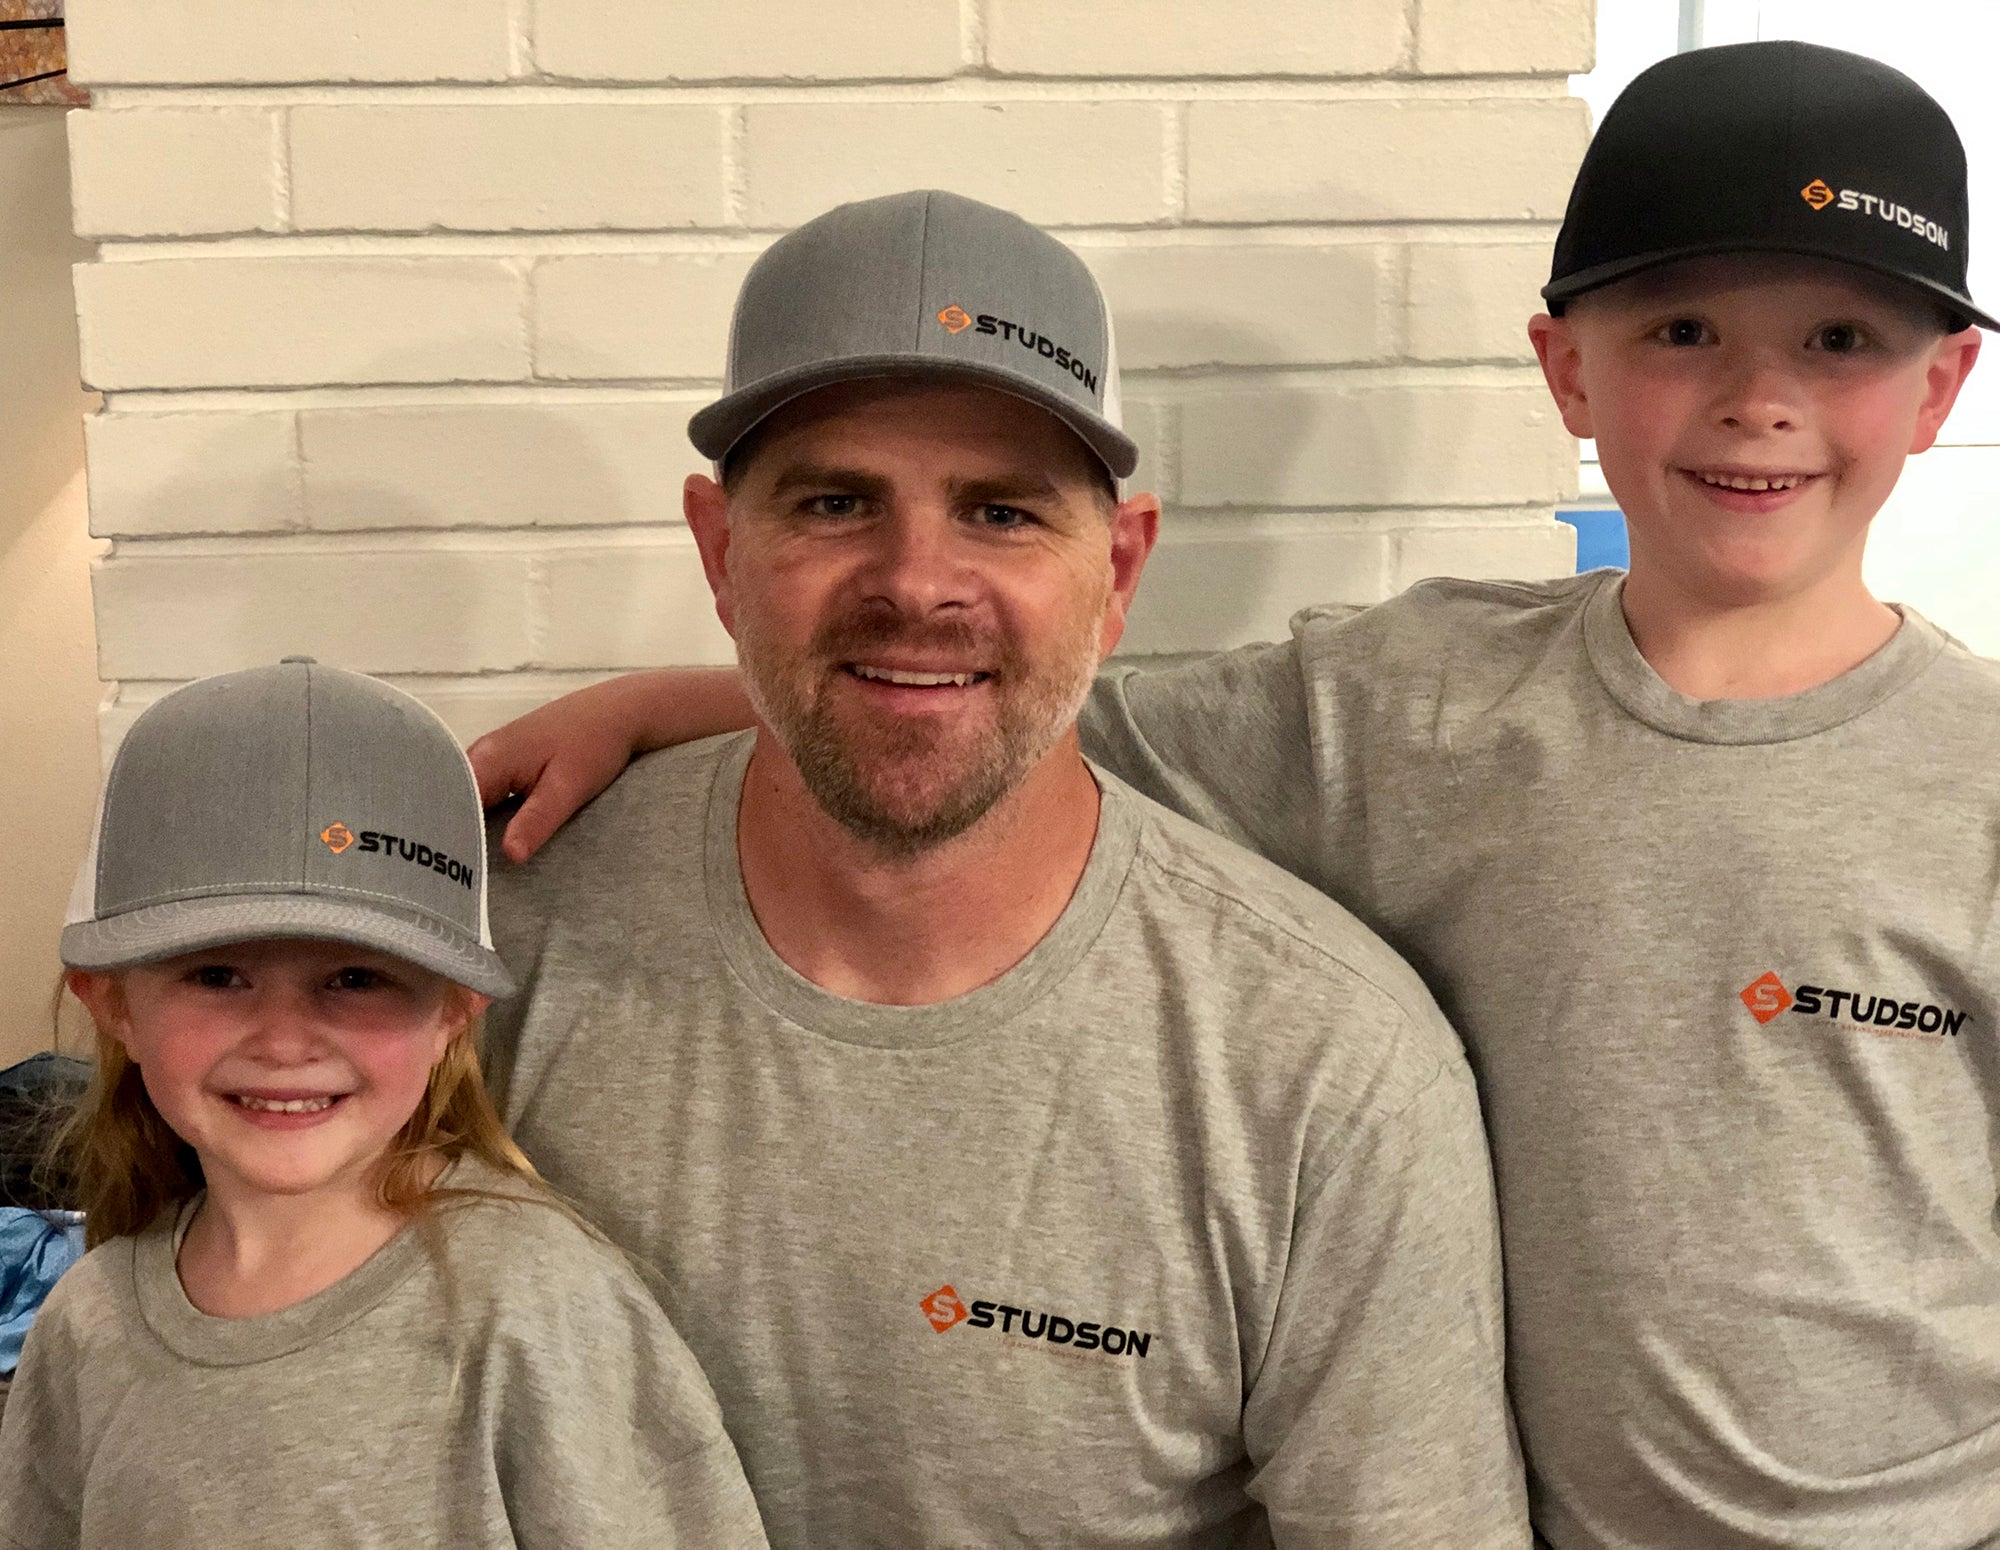 Ryan Barnes founder of STUDSON industrial head protection safety company with his children who inspired the name STUDSON. 